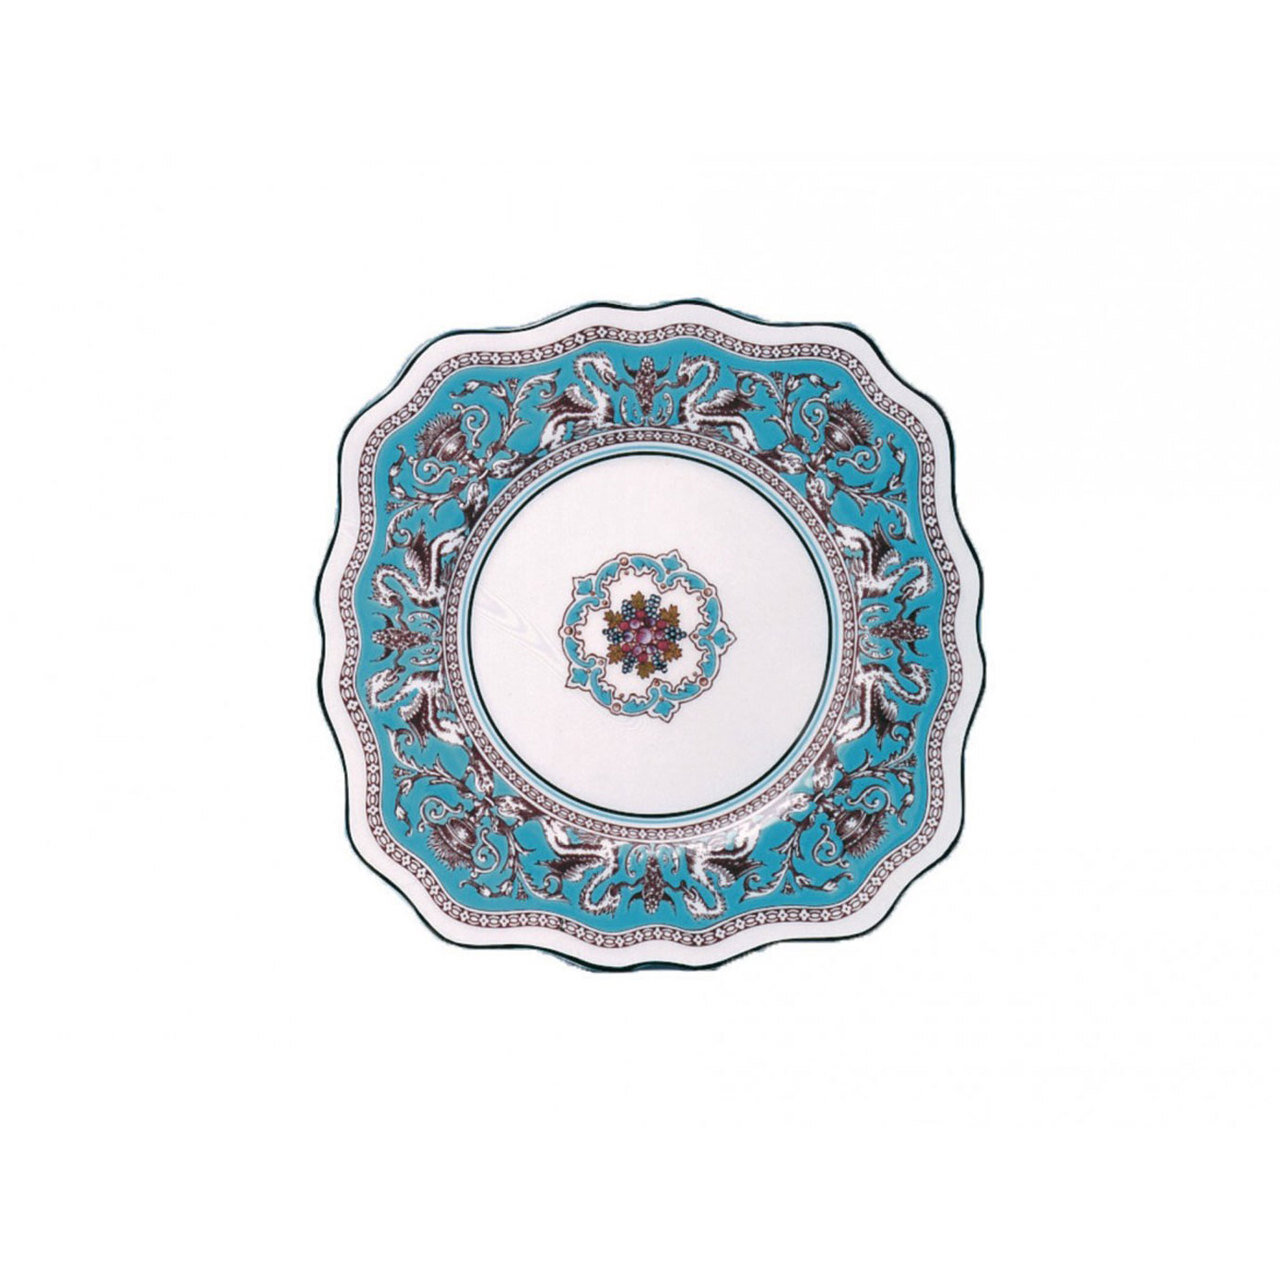 Wedgwood Florentine Turquoise Square Dessert Plate 8 Inch